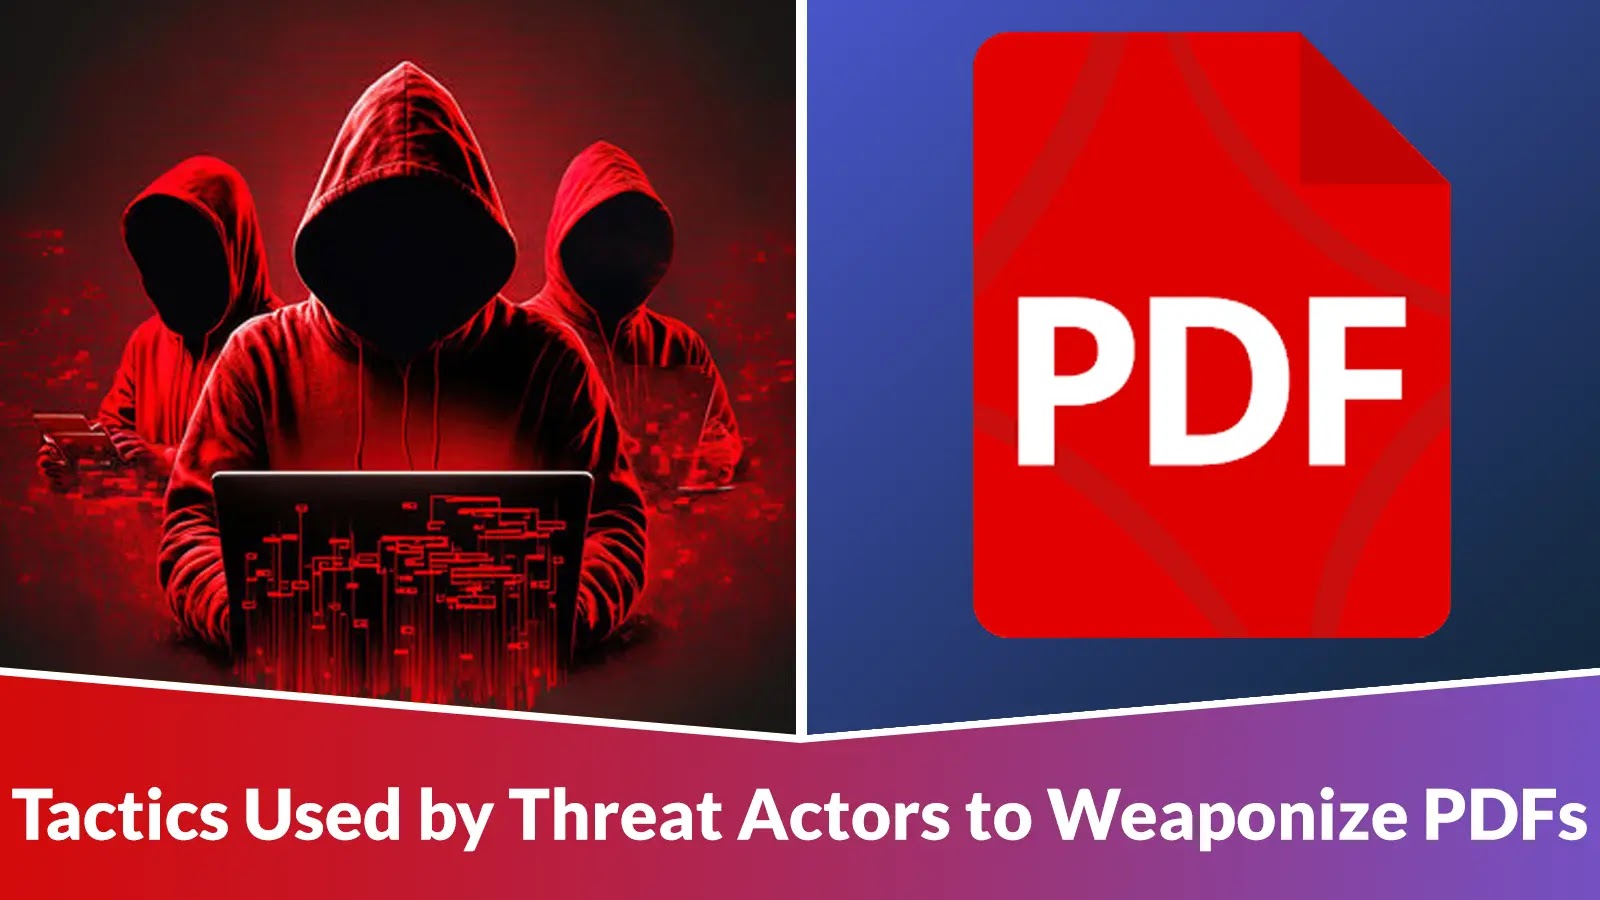 Common Tactics Used by Threat Actors to Weaponize PDFs